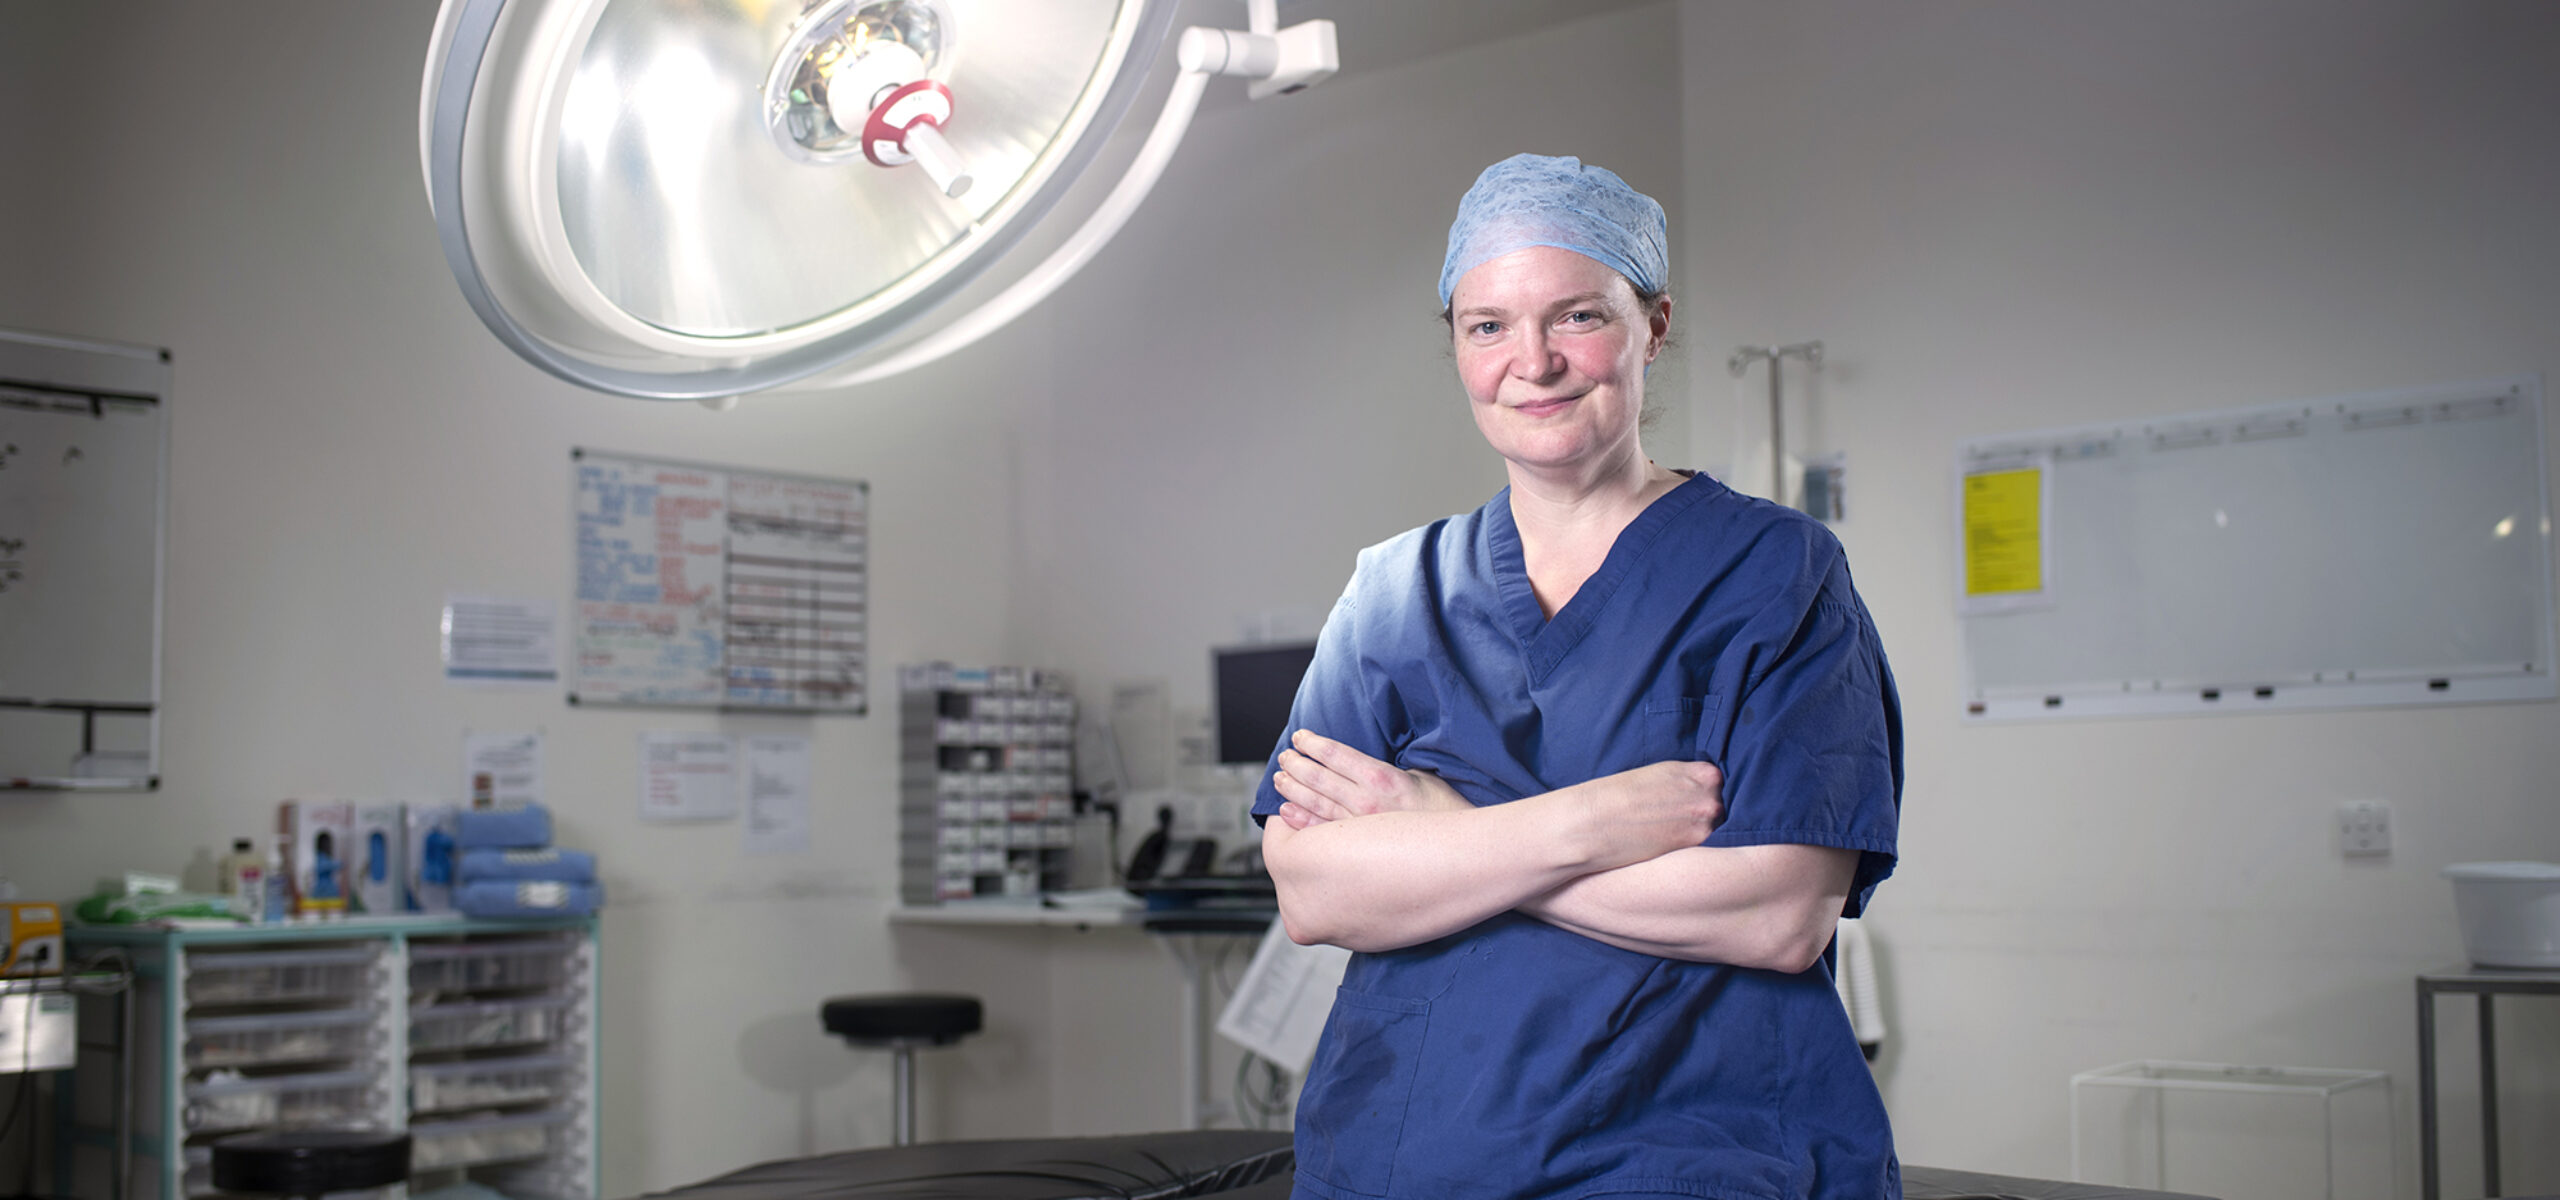 Emma Crosbie in the St Mary's Operating theatre